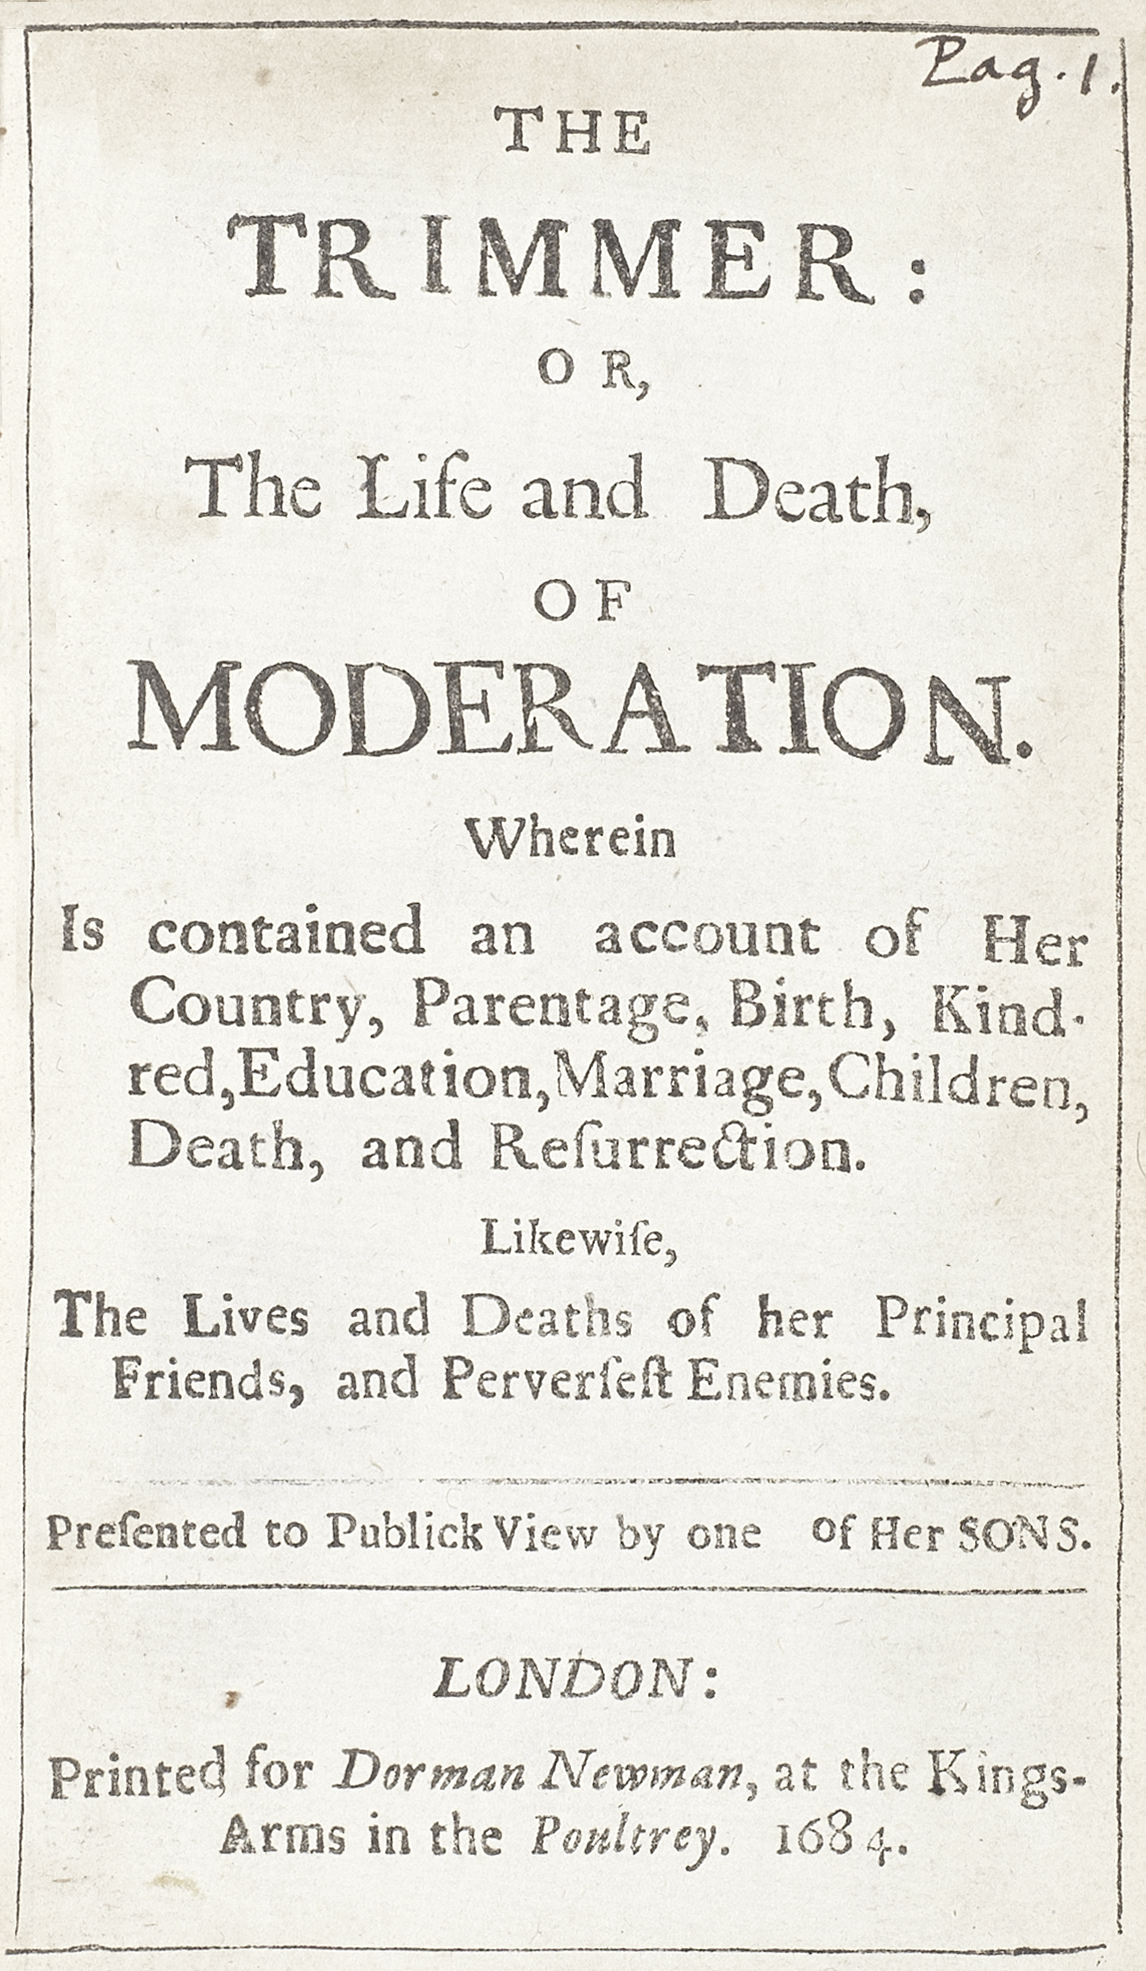 BRATHWAIT (RICHARD)] The Trimmer: Or, The Life and Death of Moderation, Dorman Newman, 1684